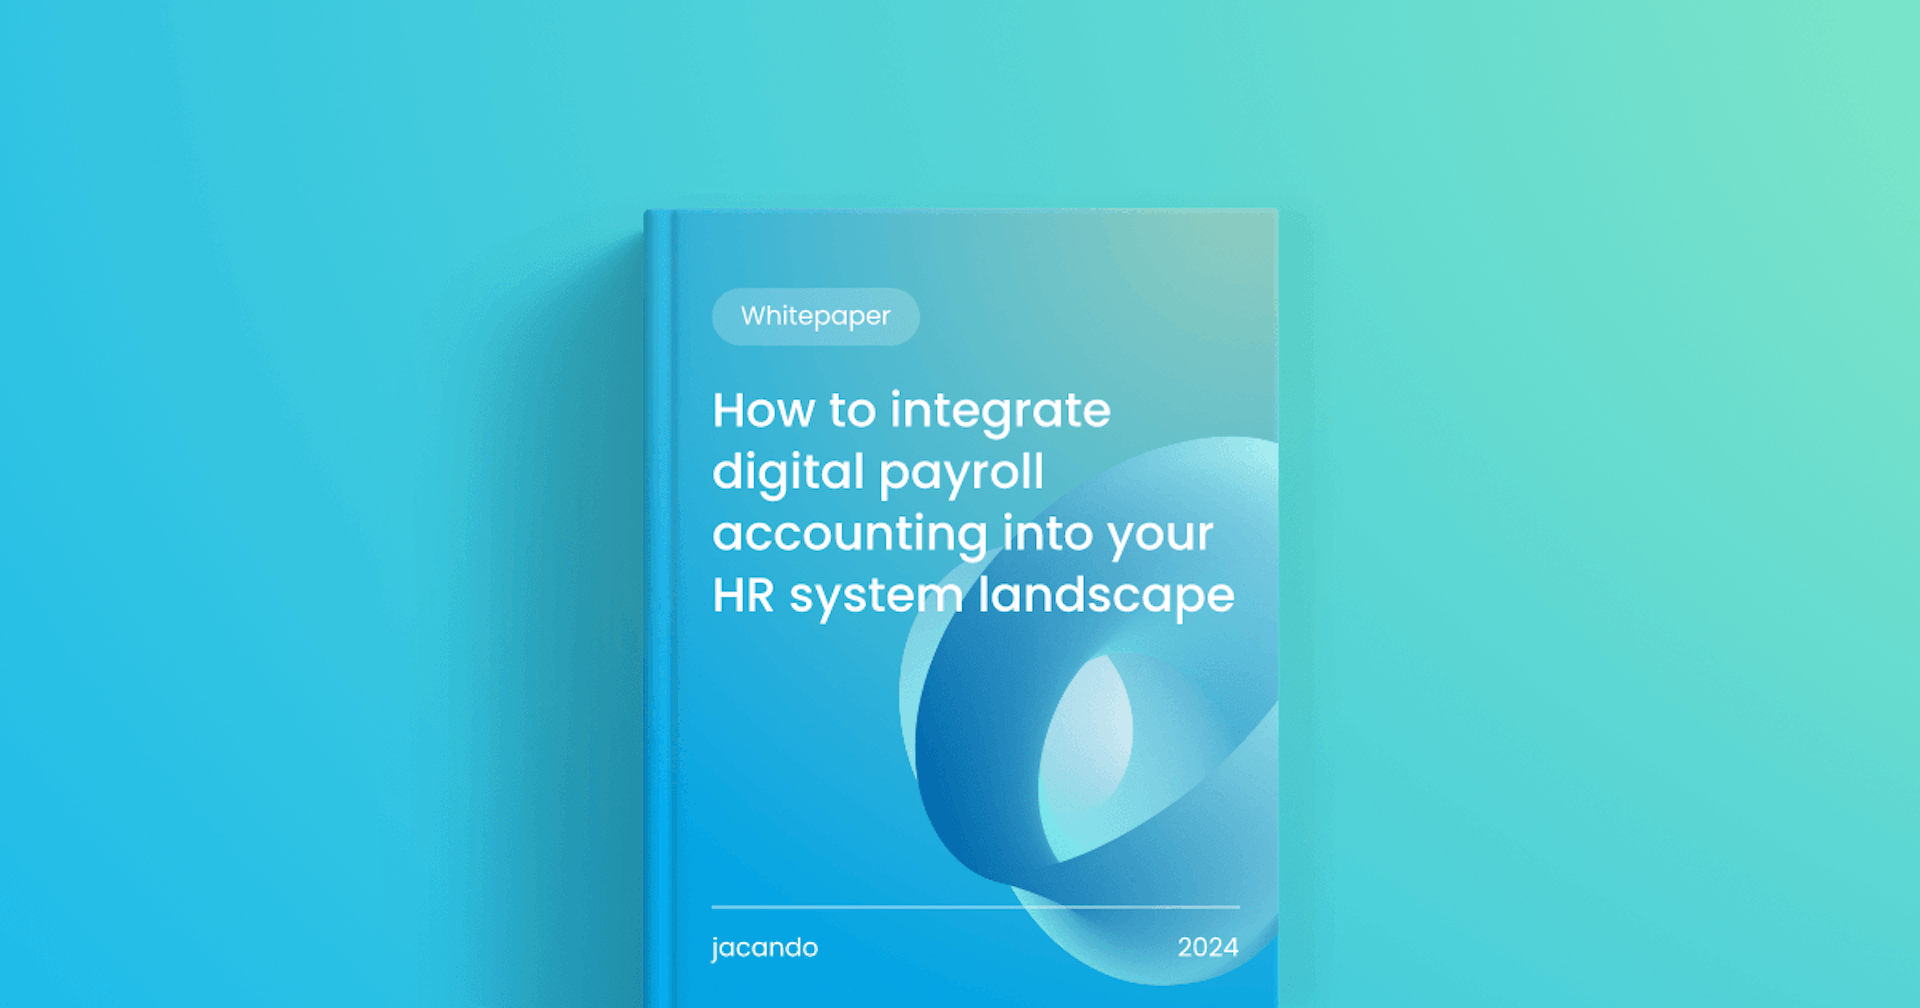 How to integrate digital payroll accounting into your HR system landscape